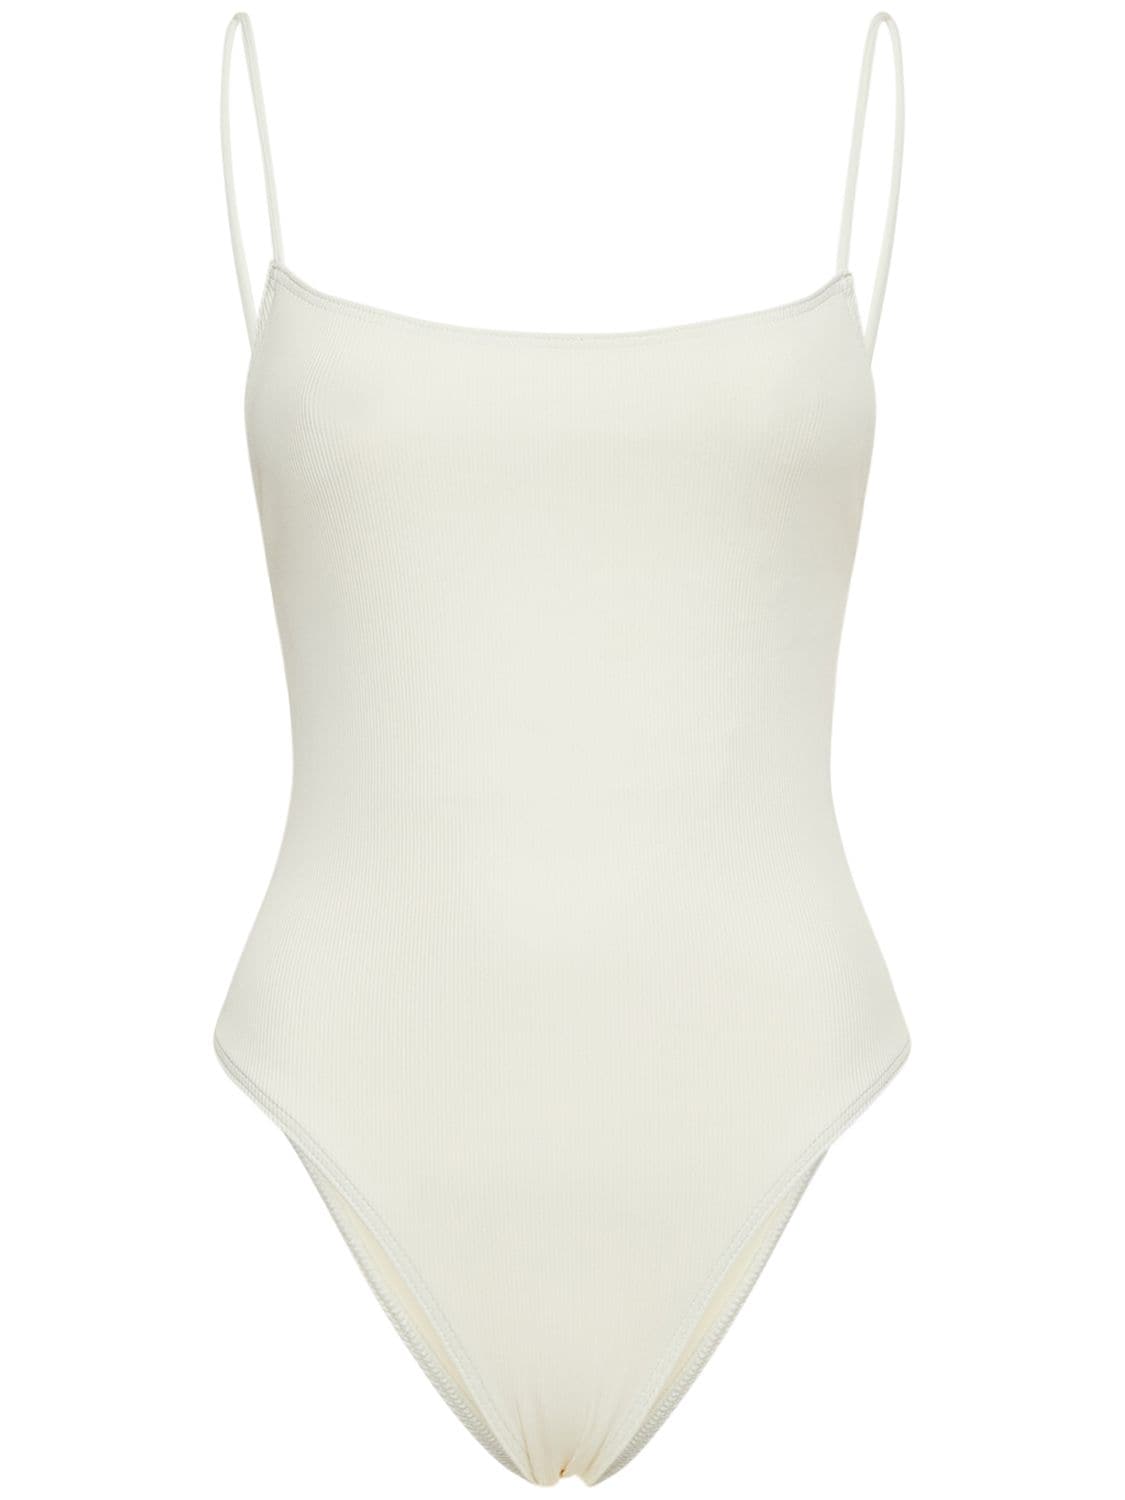 LIDO VENTIQUATTRO RIBBED ONE PIECE SWIMSUIT